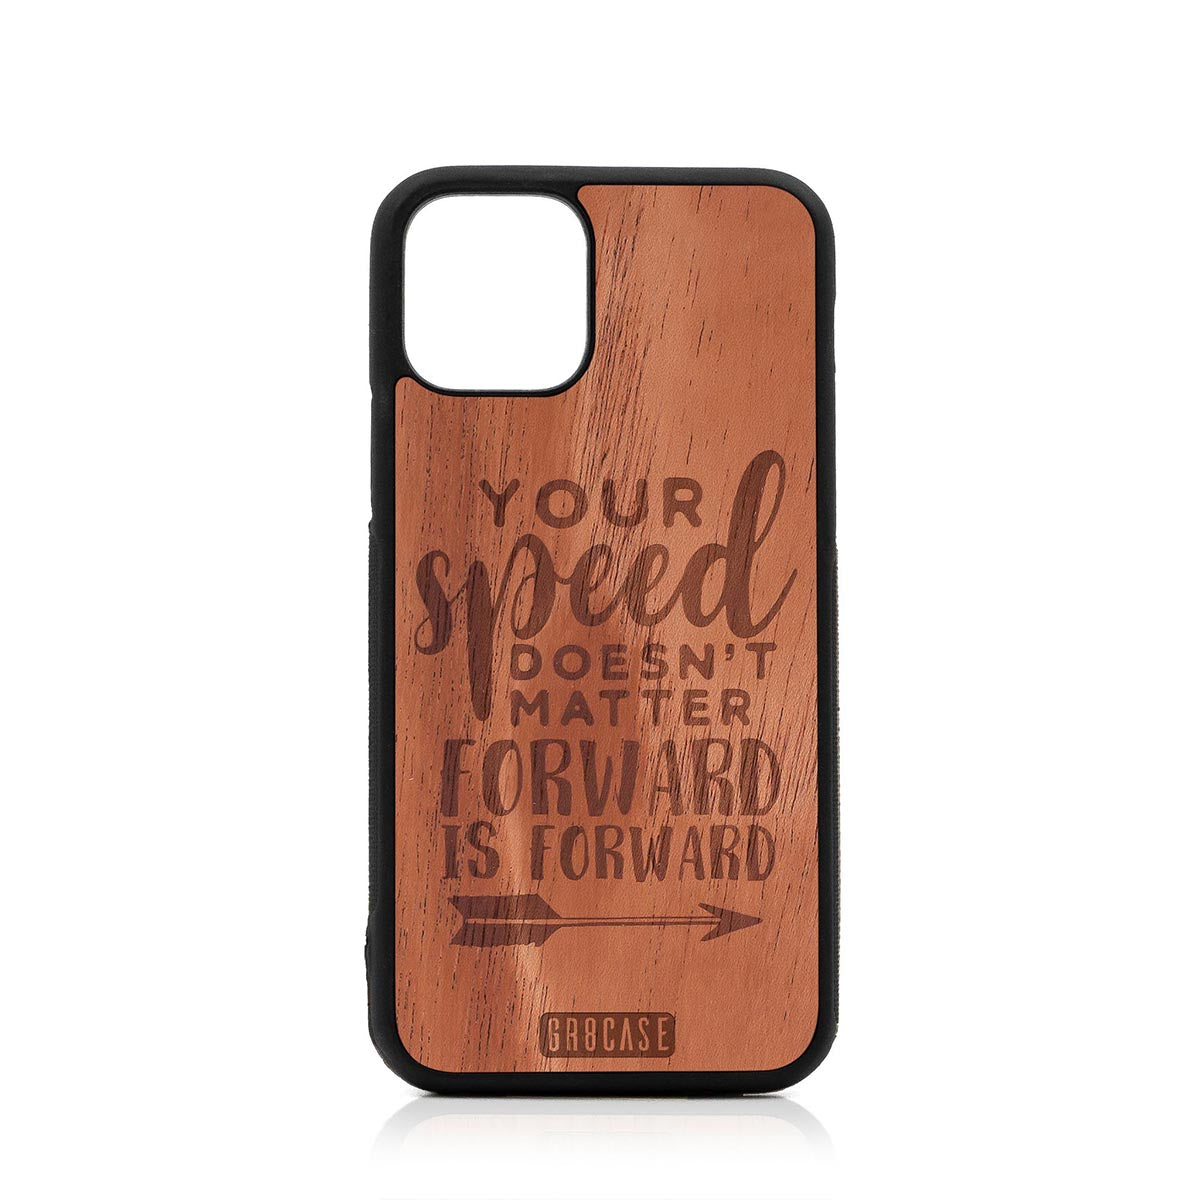 Your Speed Doesn't Matter Forward Is Forward Design Wood Case For iPhone 11